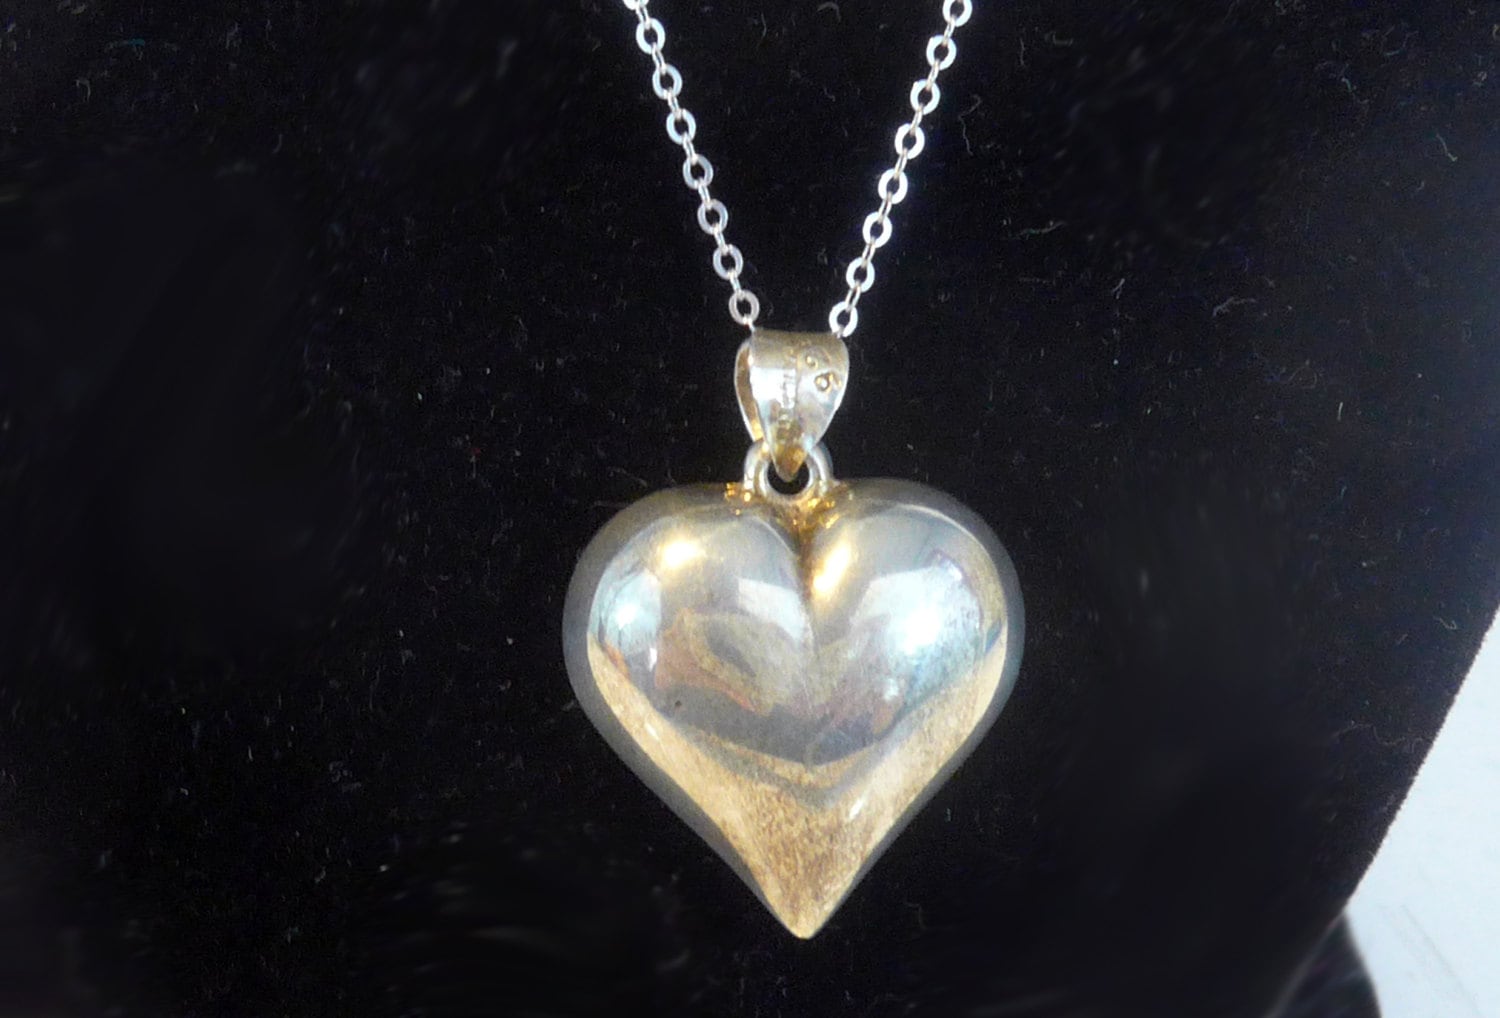 Vintage 925 Sterling Silver Puffy Heart Shaped Pendant Necklace with